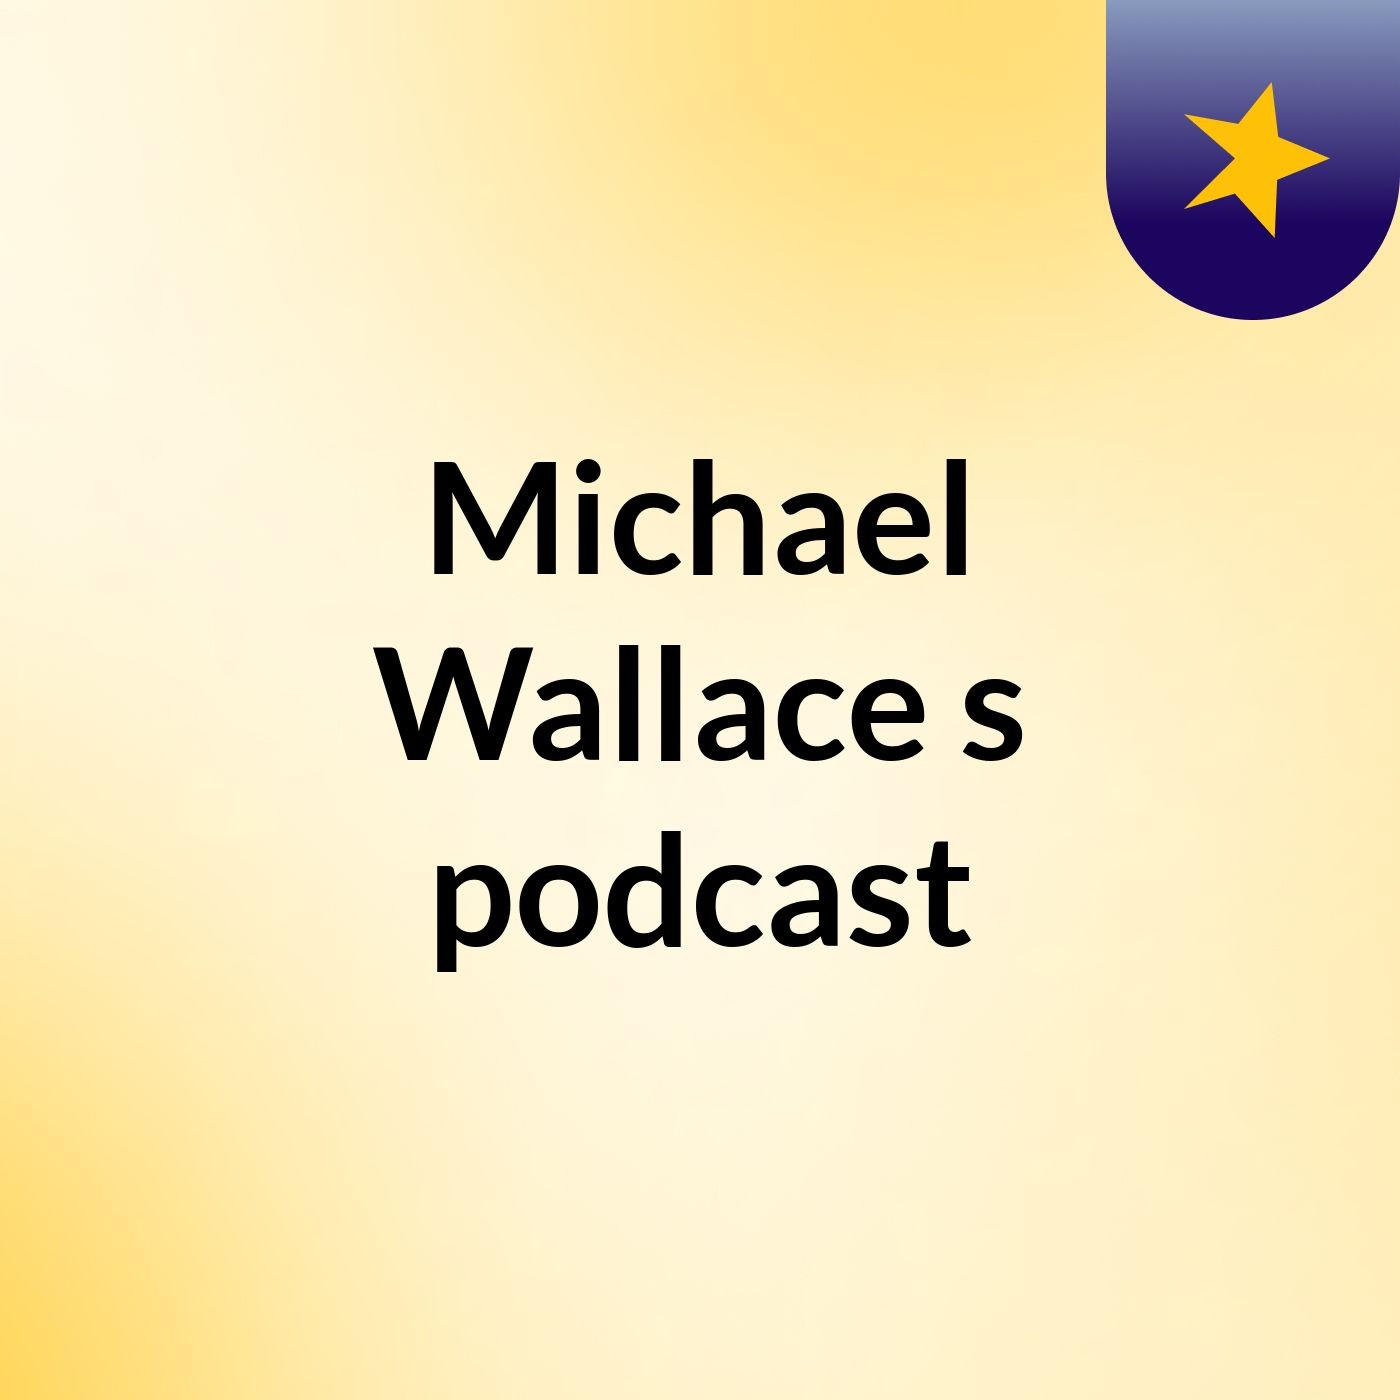 Michael Wallace's podcast